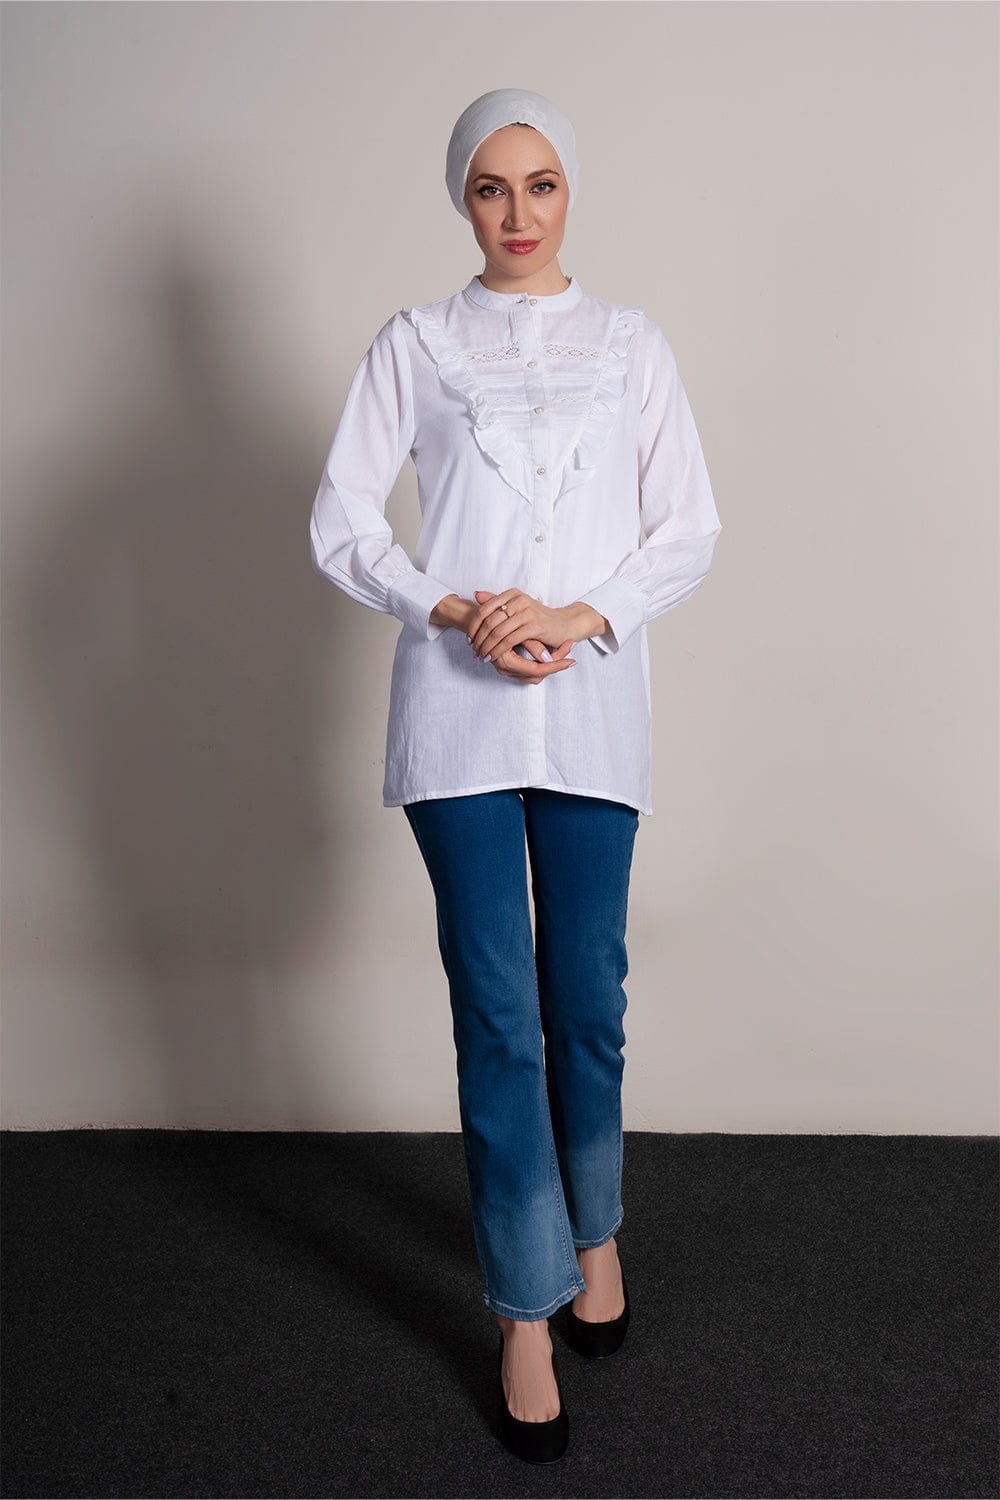 Hope Not Out by Shahid Afridi Eastern Women Shirts White Textured Button Down Top